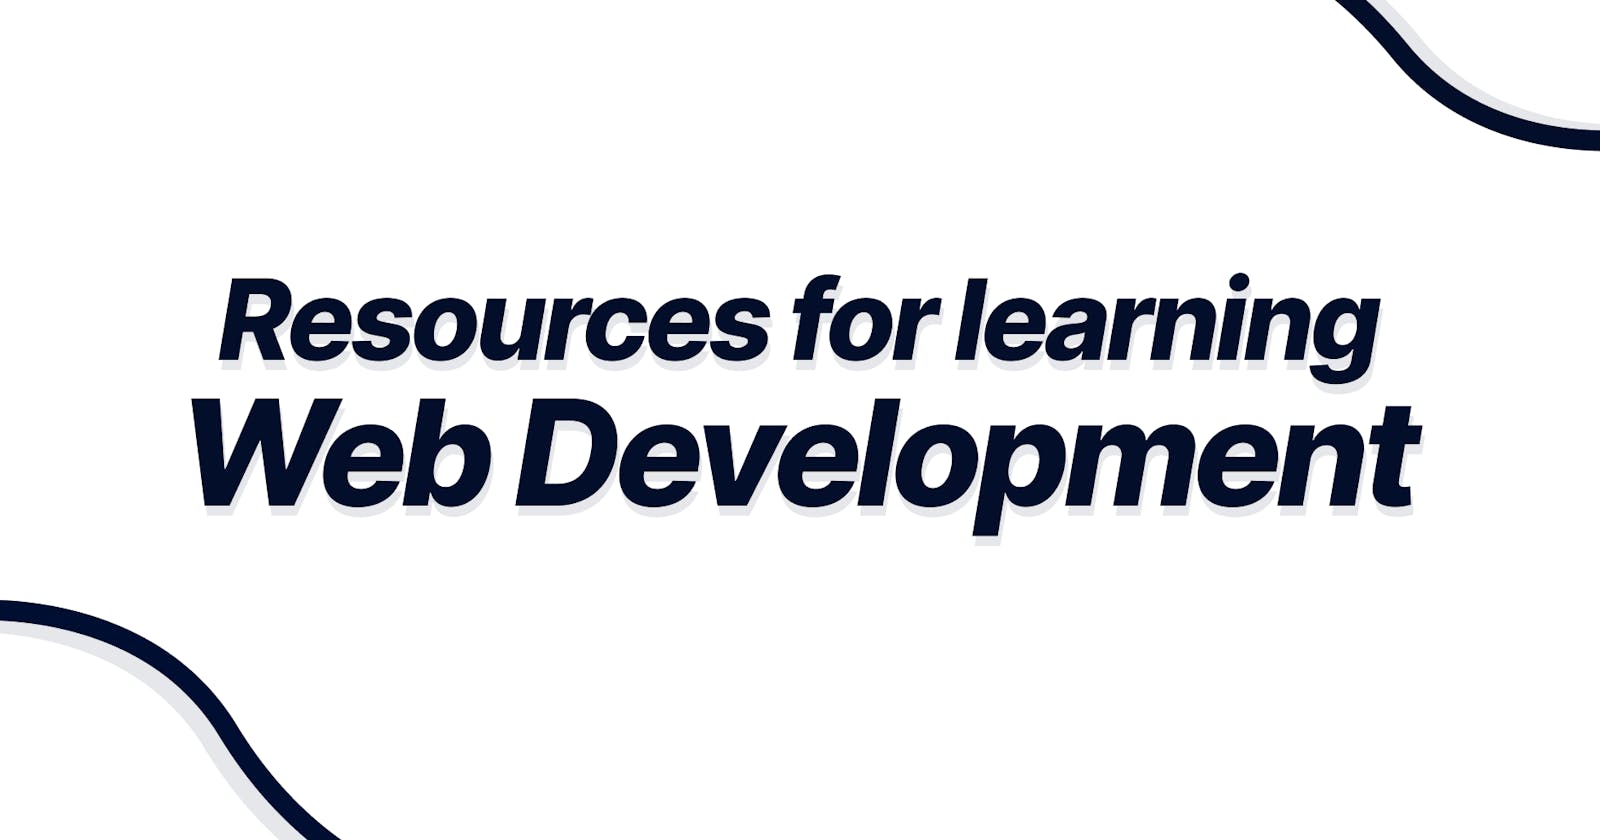 Resources for learning Web Development (2021)